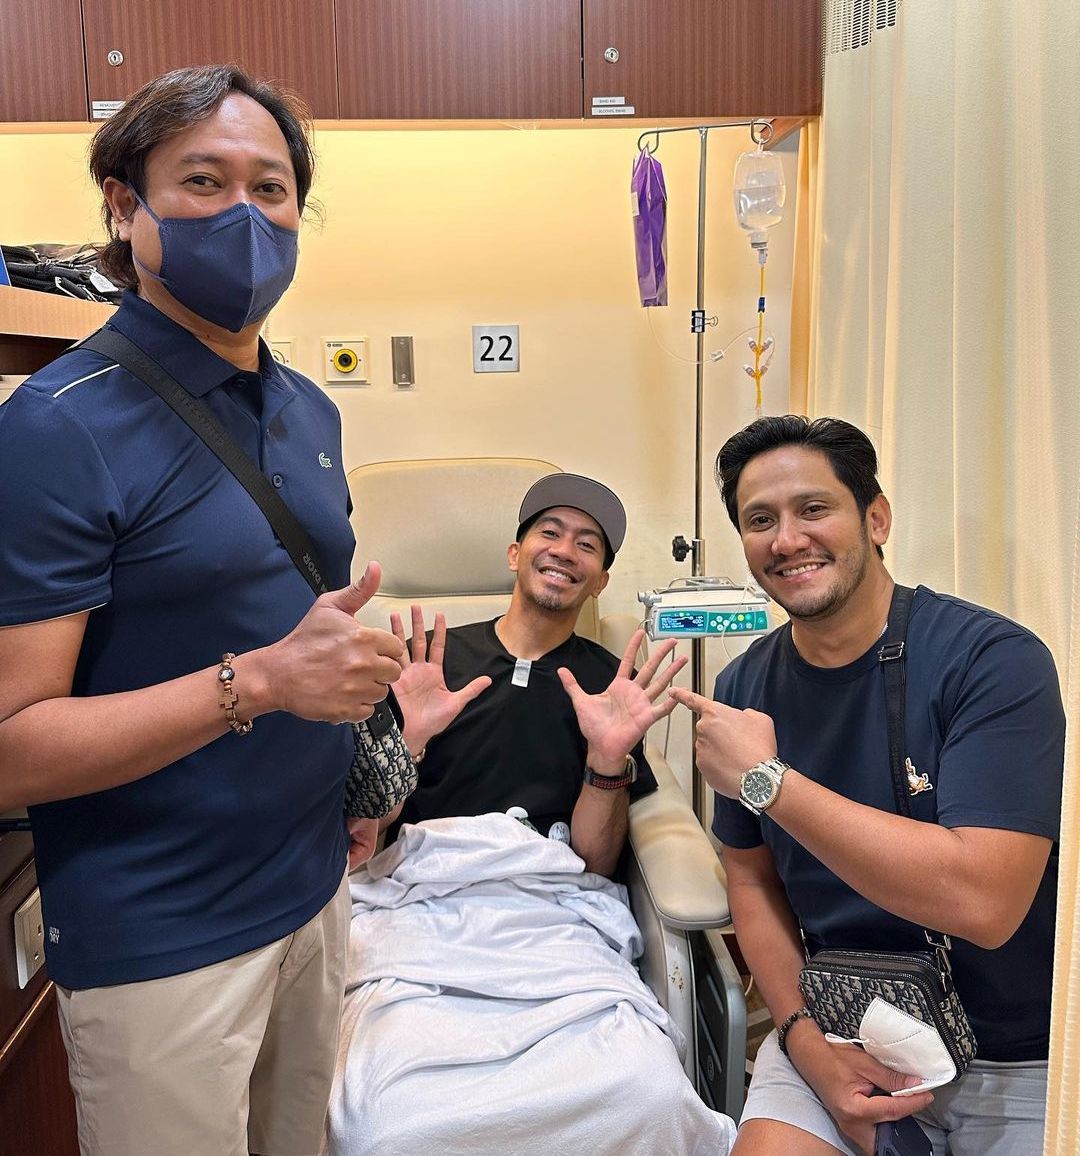 LA Tenorio (center) is accompanied by his close friends during his chemotherapy session in Singapore.